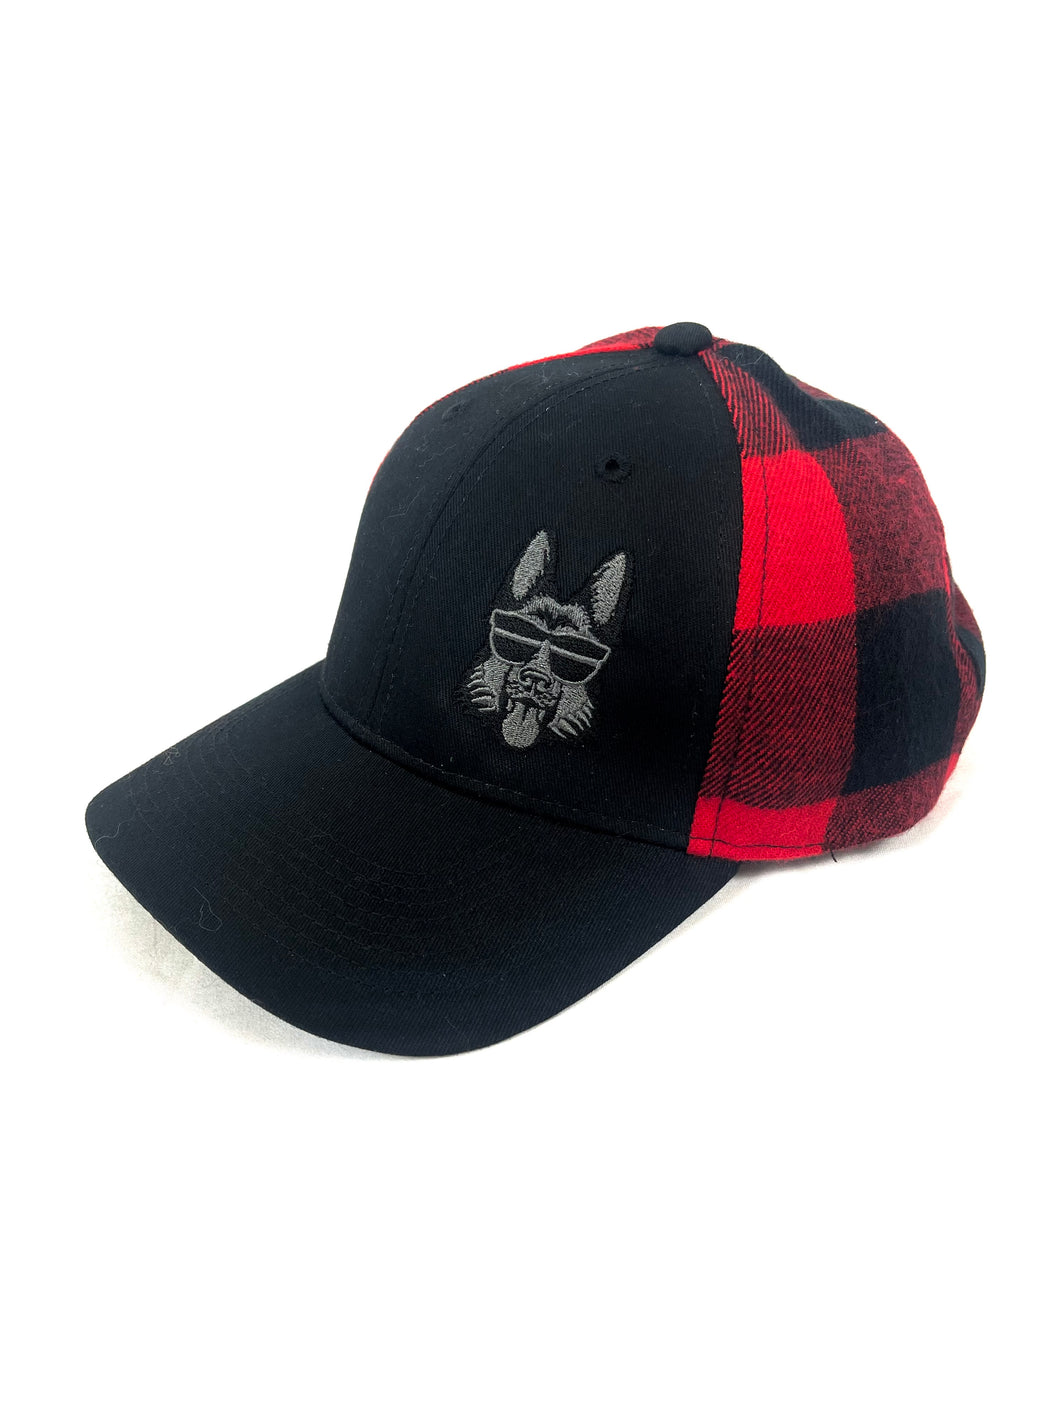 The Flannel Legend Snapback